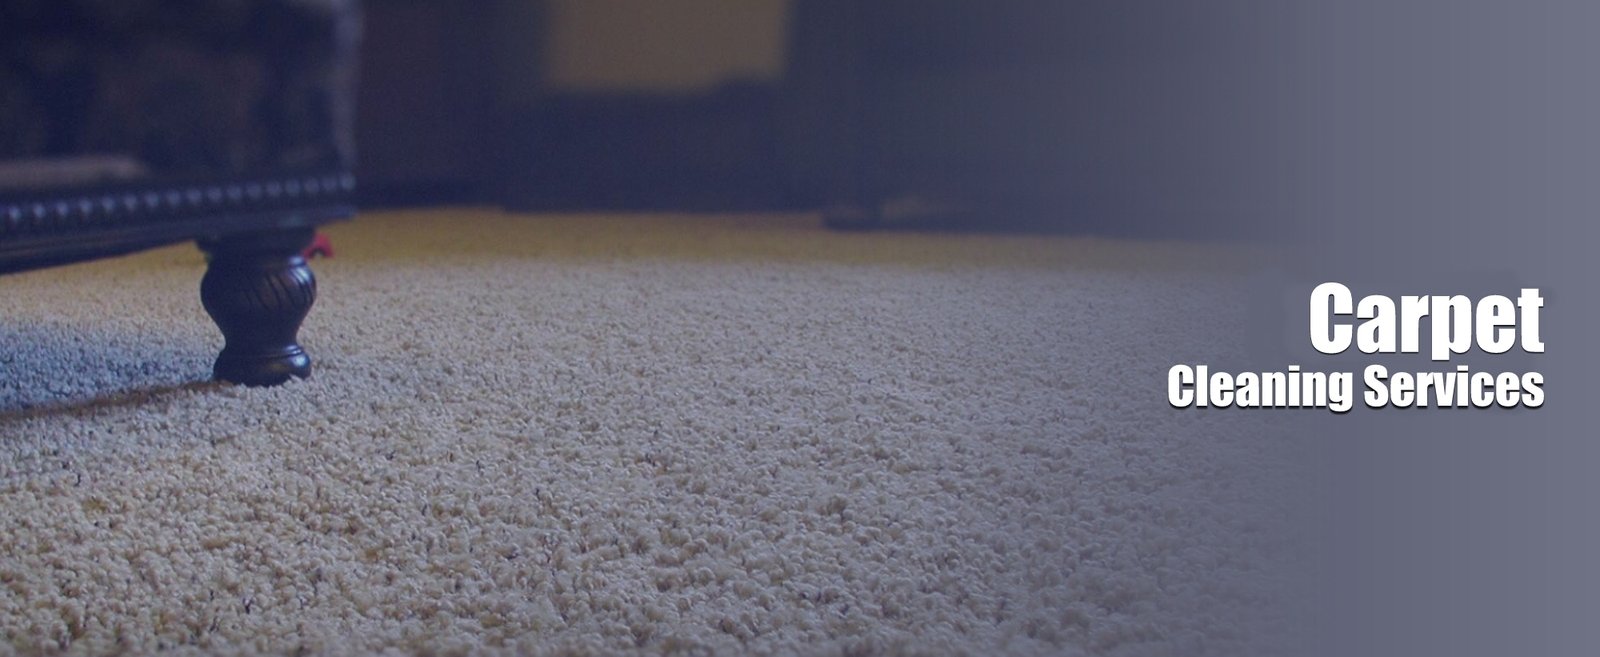 How maintain flooring carpet looking perfect through carpet cleaners Adelaide?